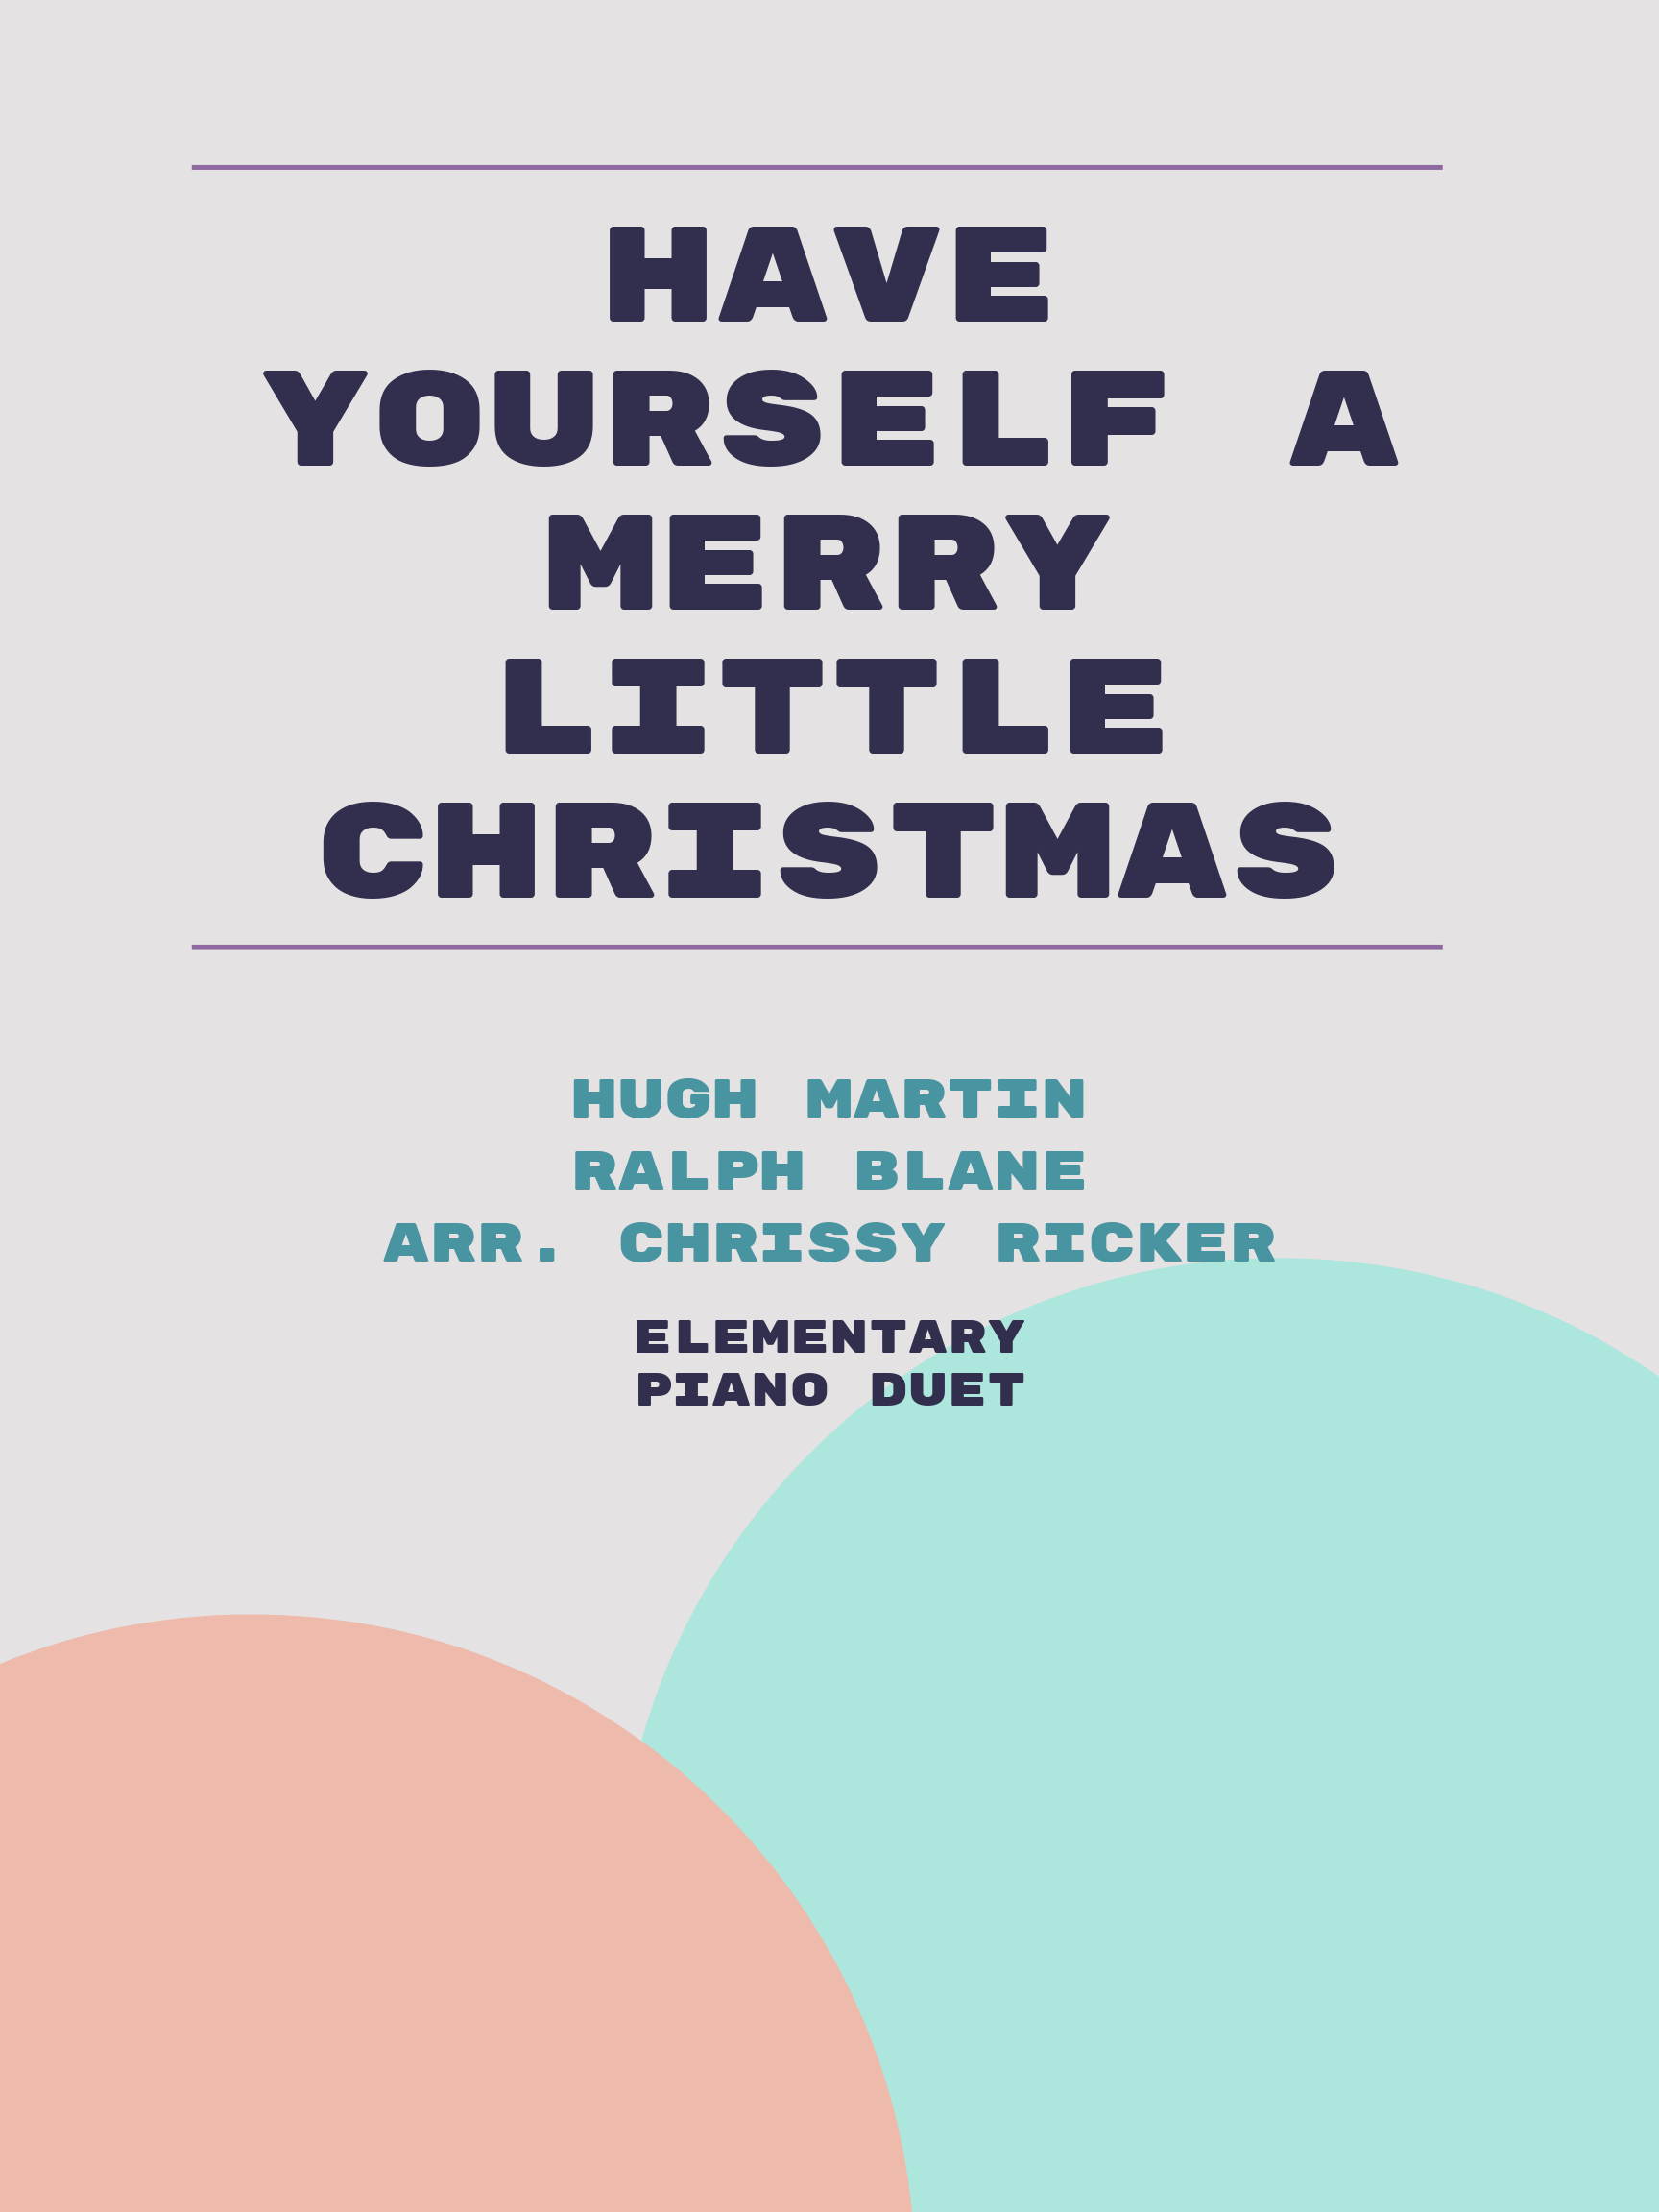 Have Yourself a Merry Little Christmas by Hugh Martin, Ralph Blane